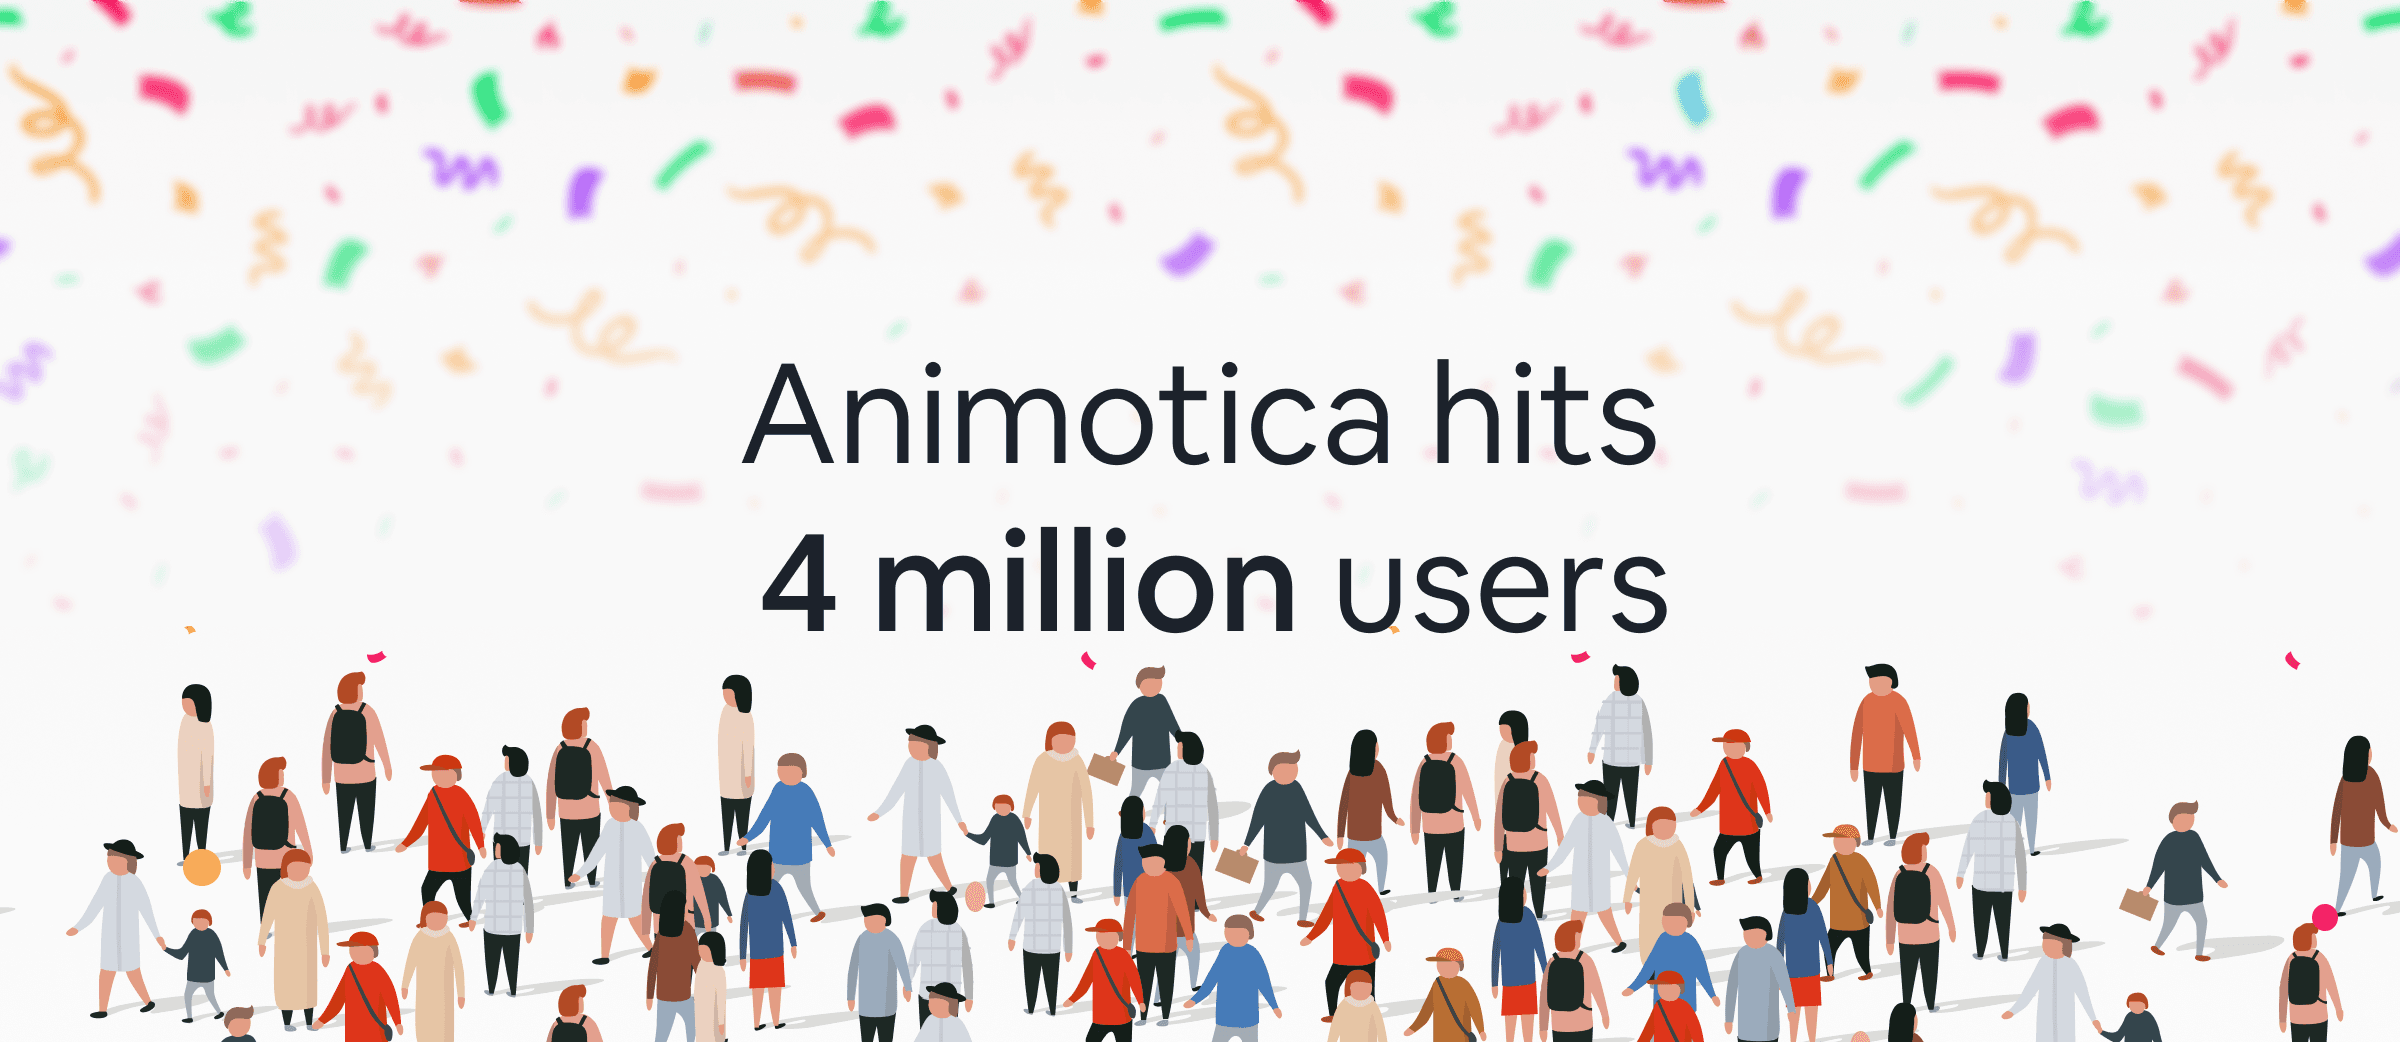 Animotica Hits 4 Million Users